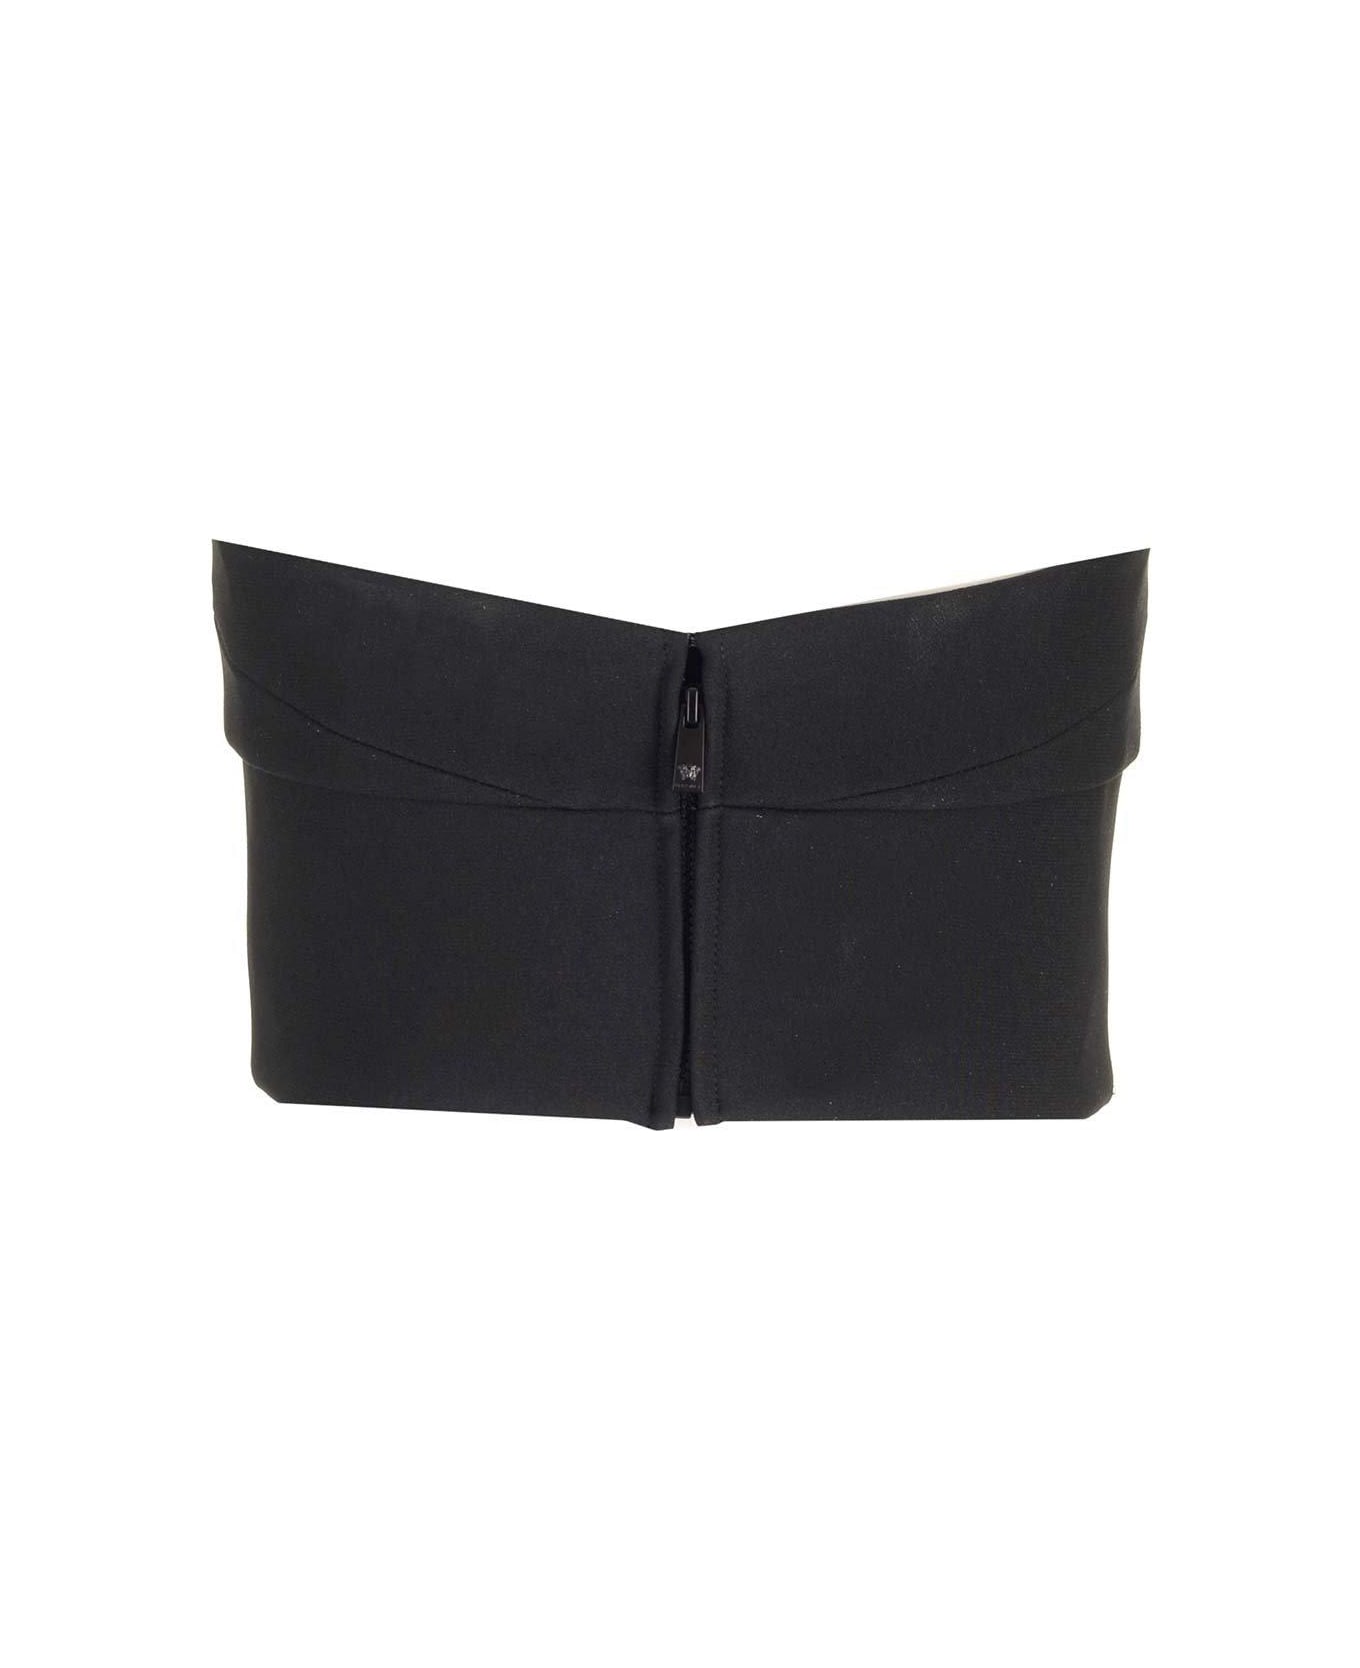 Versace Strapless Cropped Top - BLACK (Black)